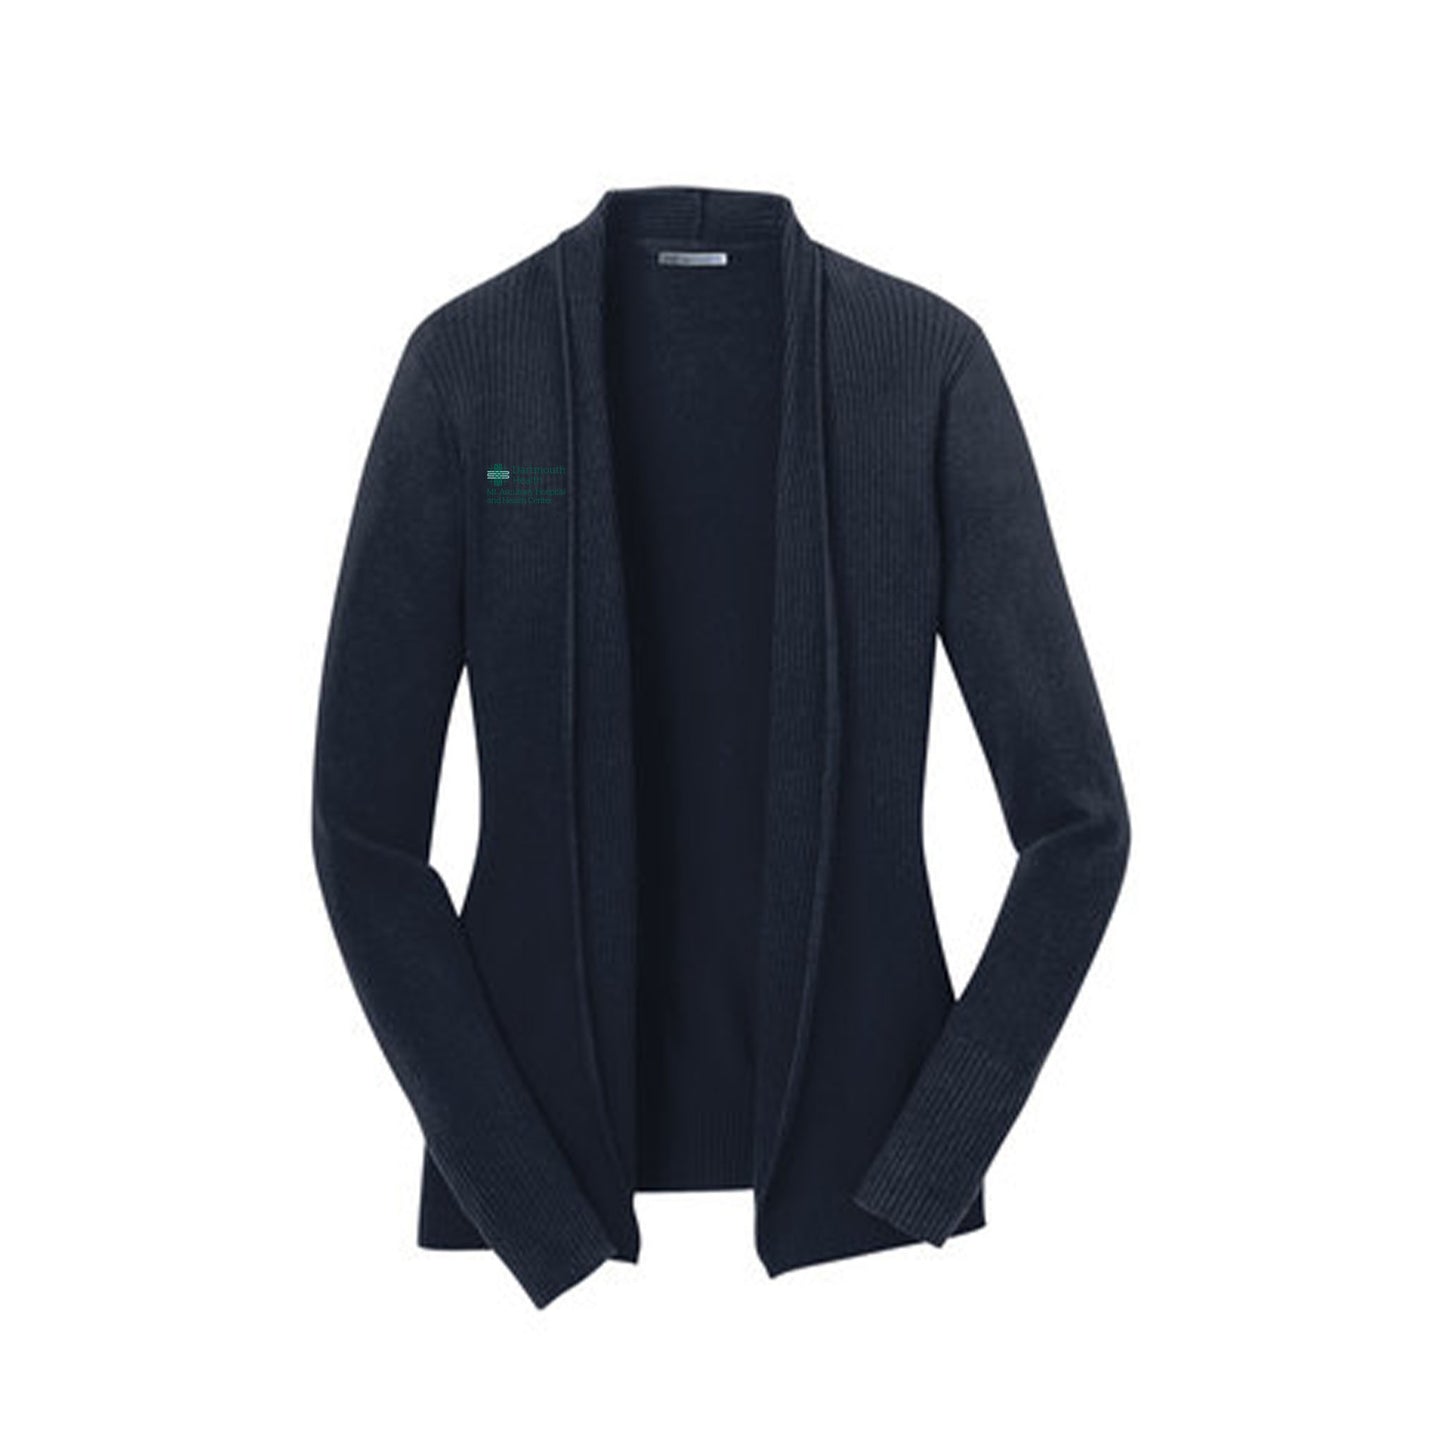 Port Authority | Women's Open Front Cardigan Sweater (MAHHC/DH)